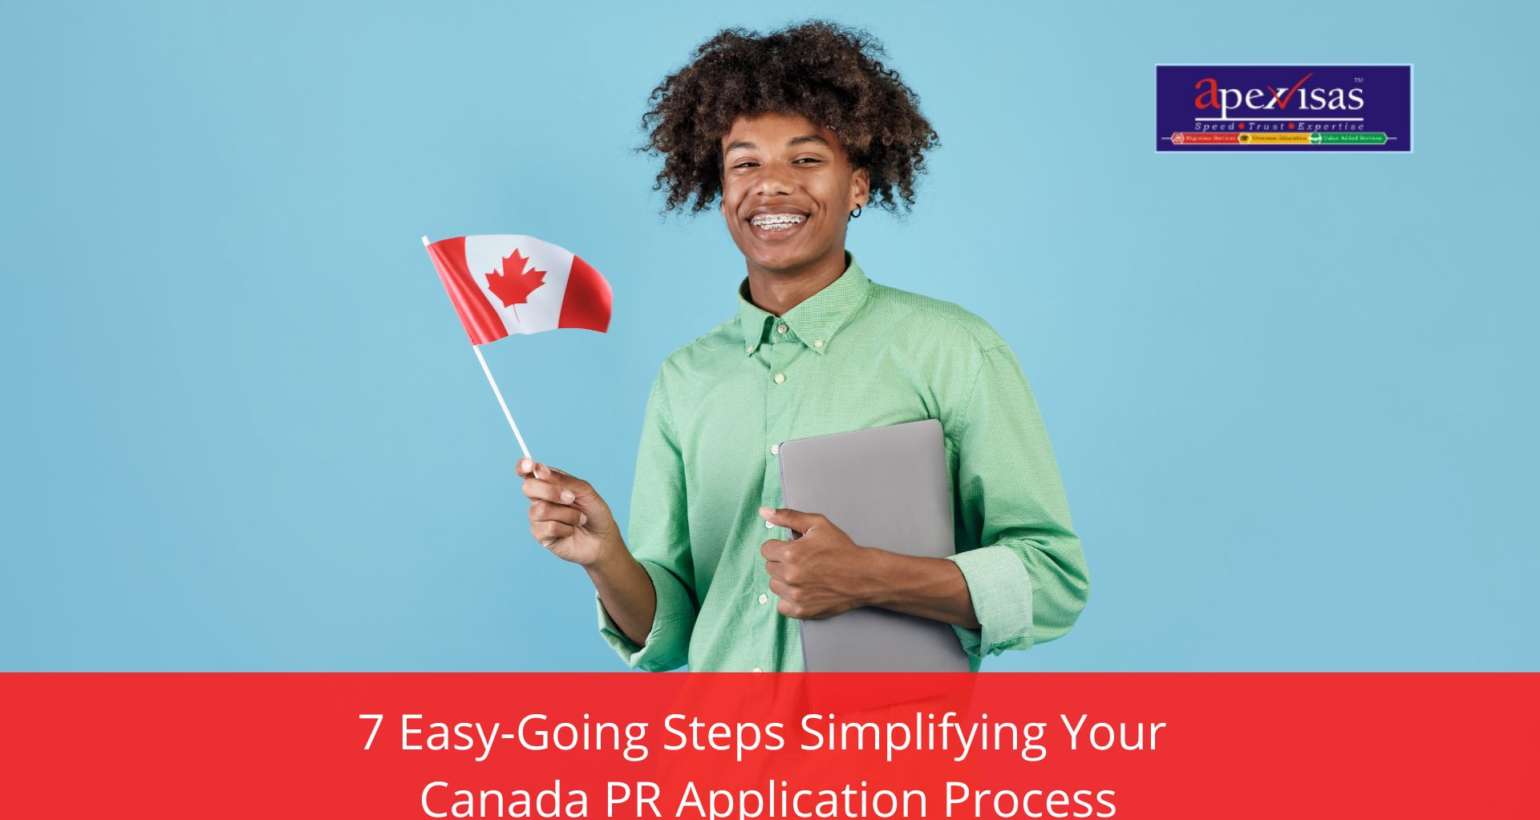 7 Easy-Going Steps Simplifying Your Canada PR Application Process